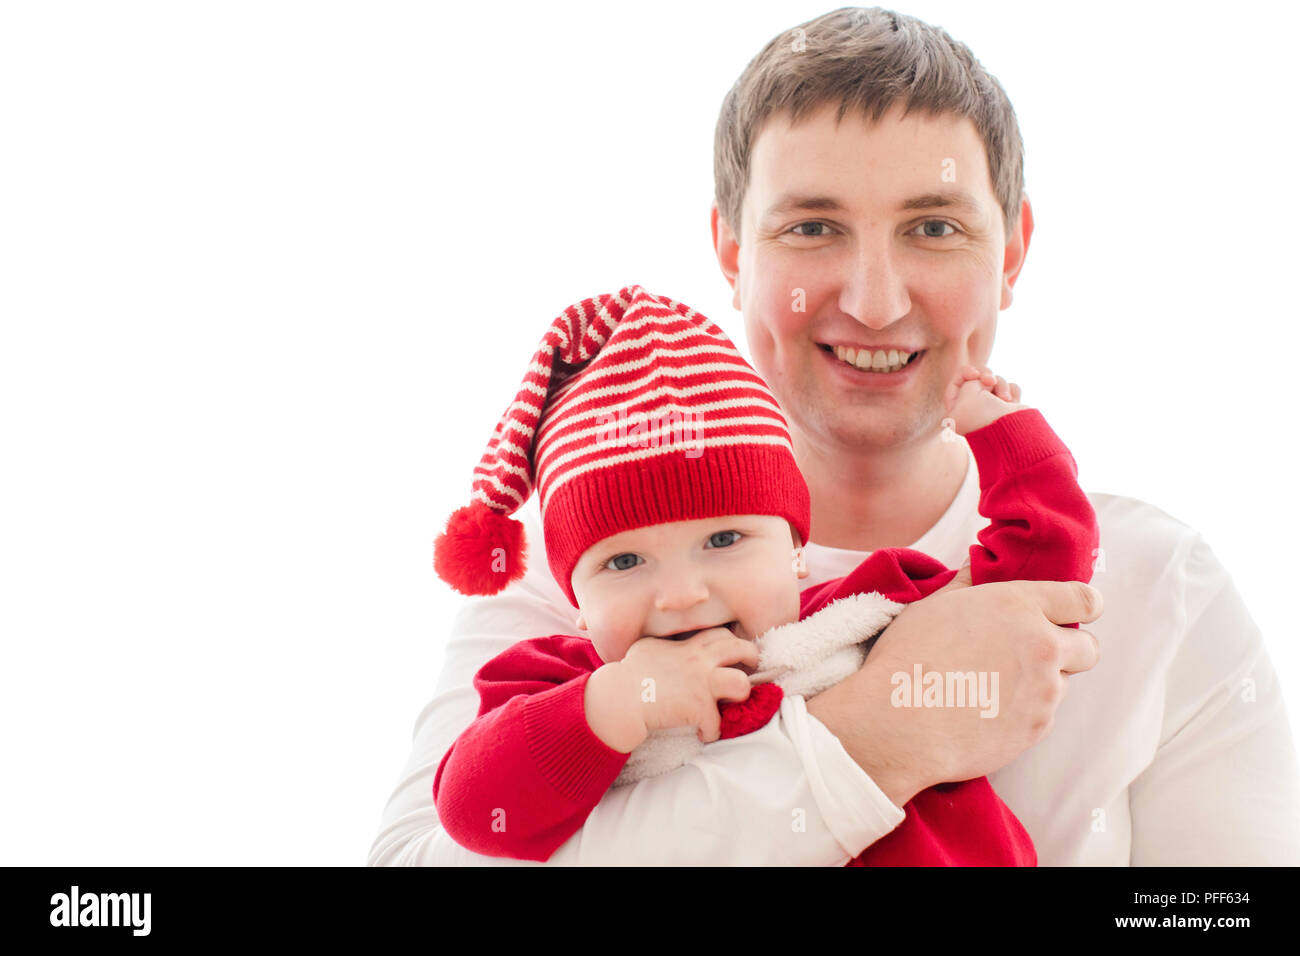 Man holding baby in Christmas costume Stock Photo